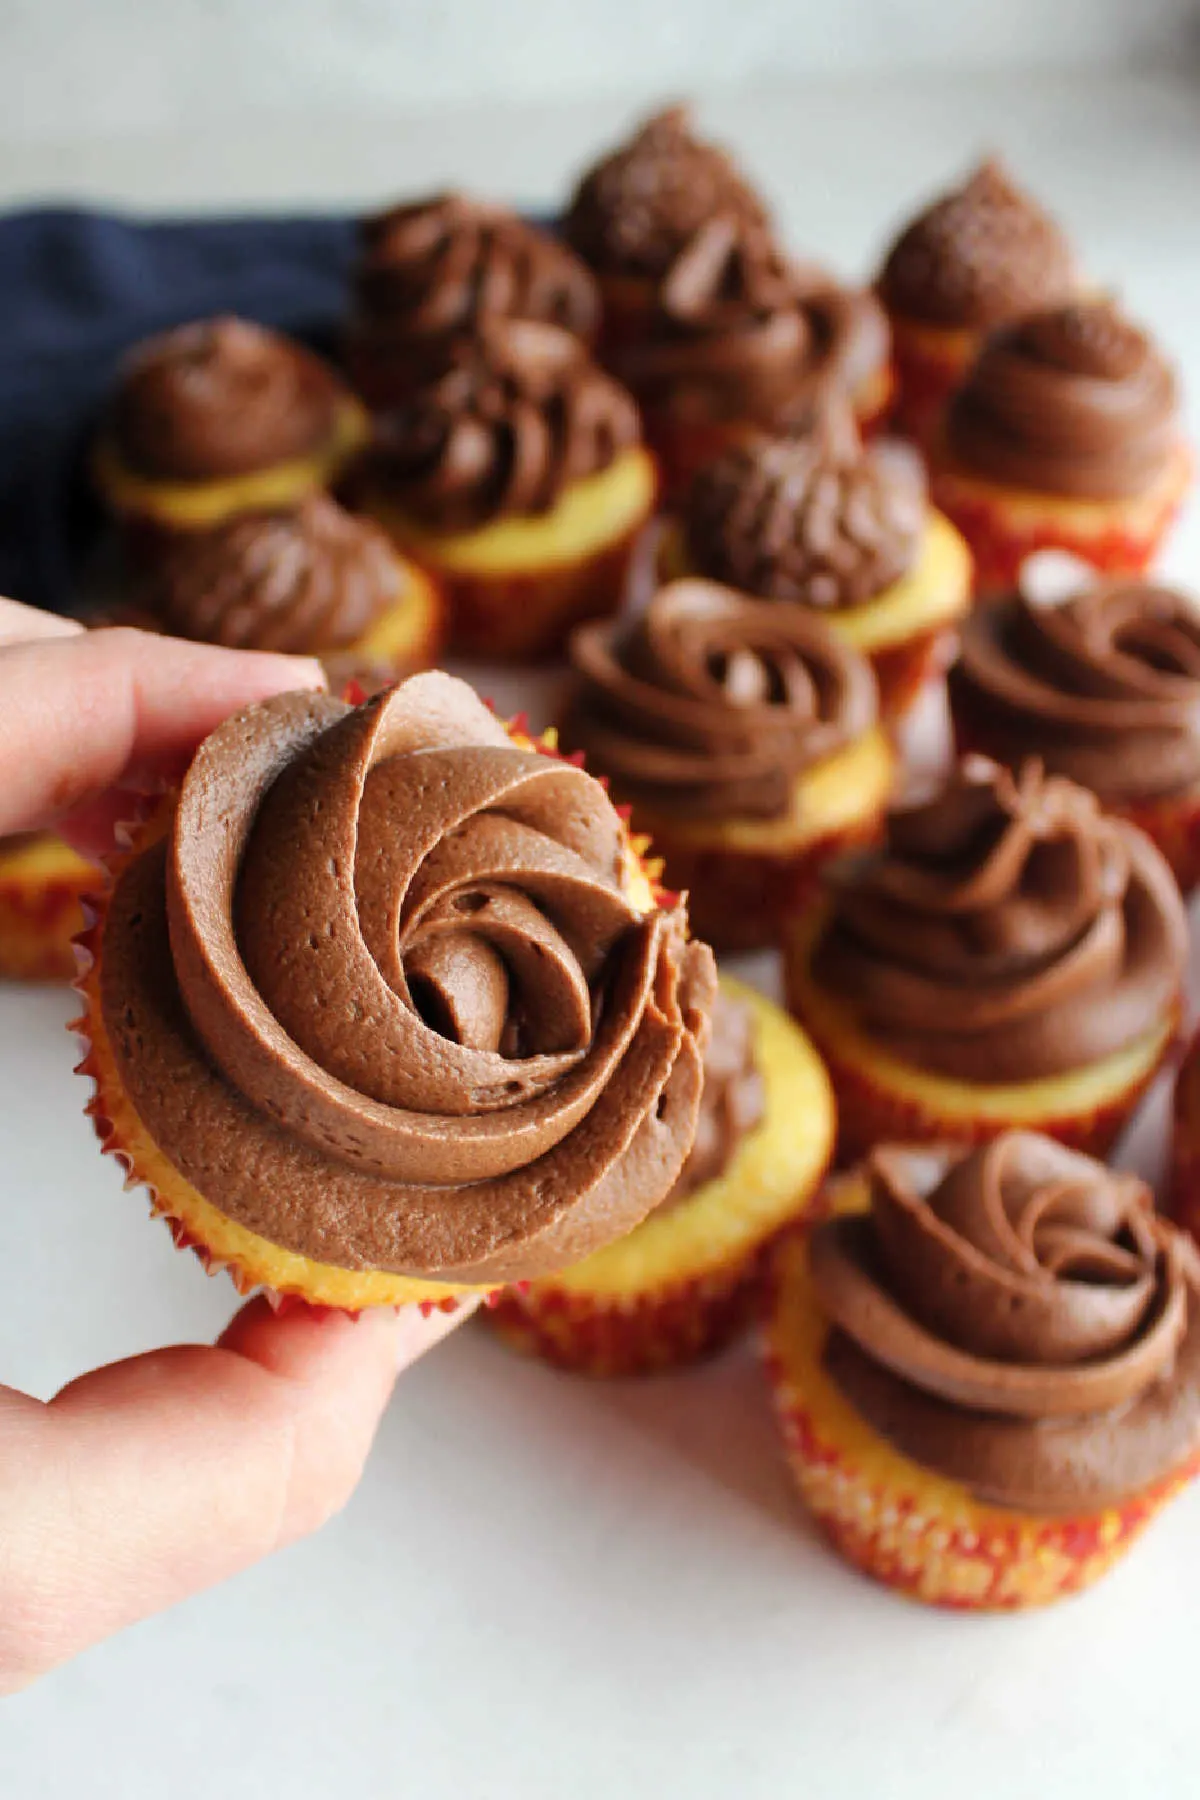 Hand holding cupcake topped with a piped rosette of chocolate fudge frosting.